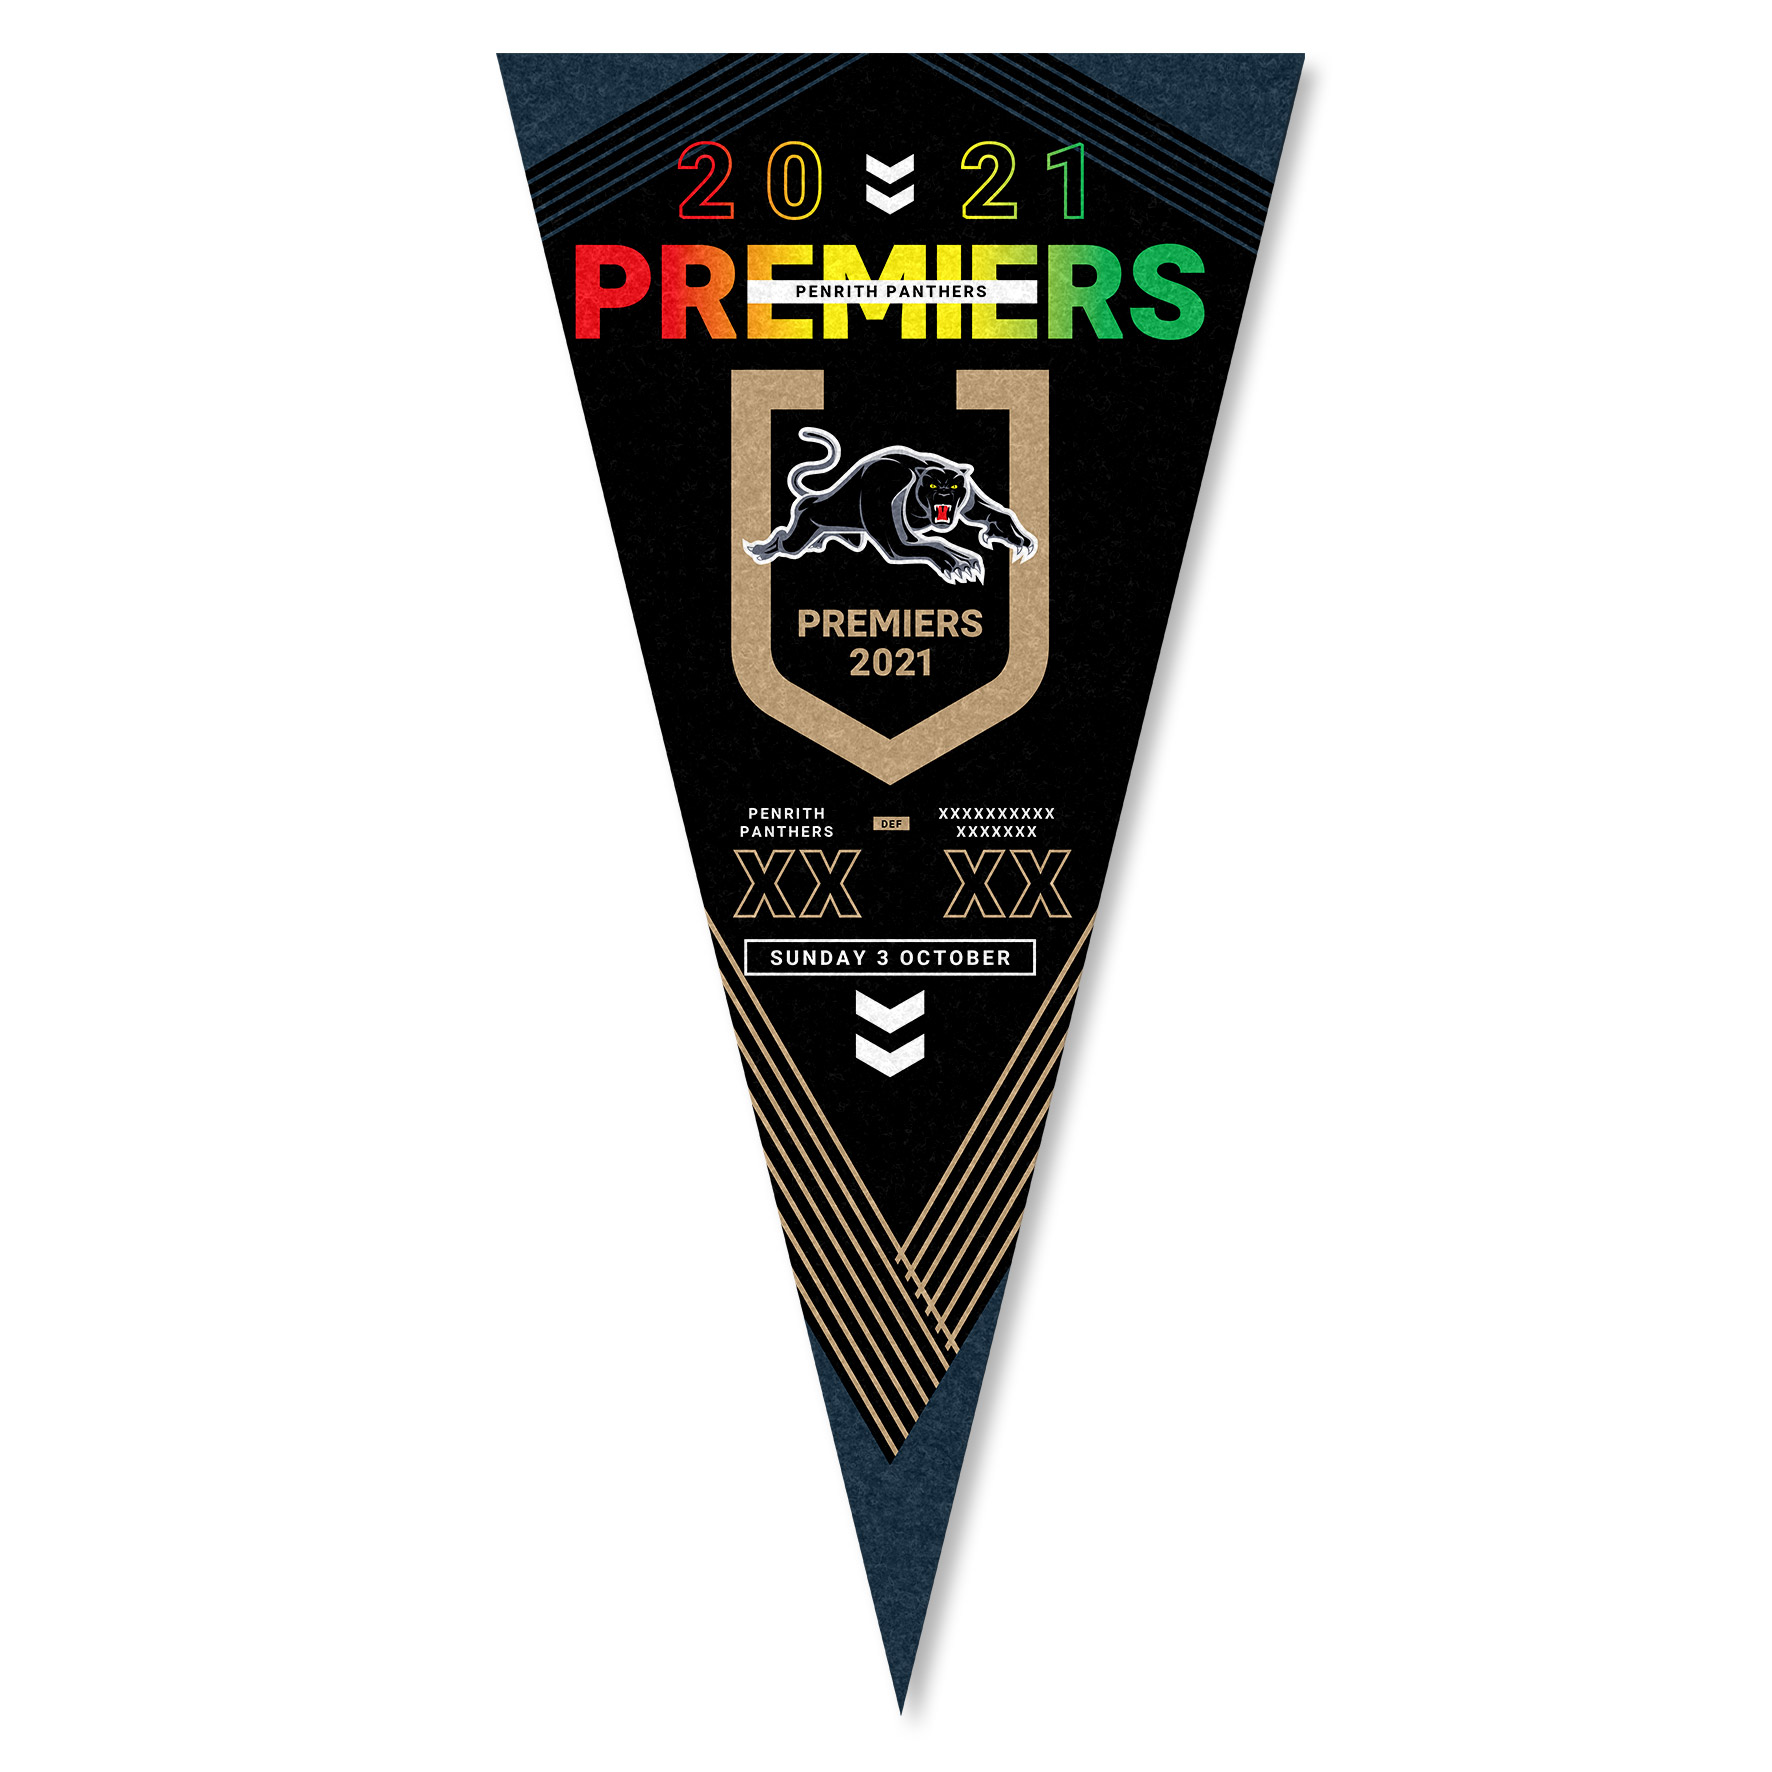 Penrith Panthers 2021 NRL Premiers Felt Wall Pennant Banner Flag